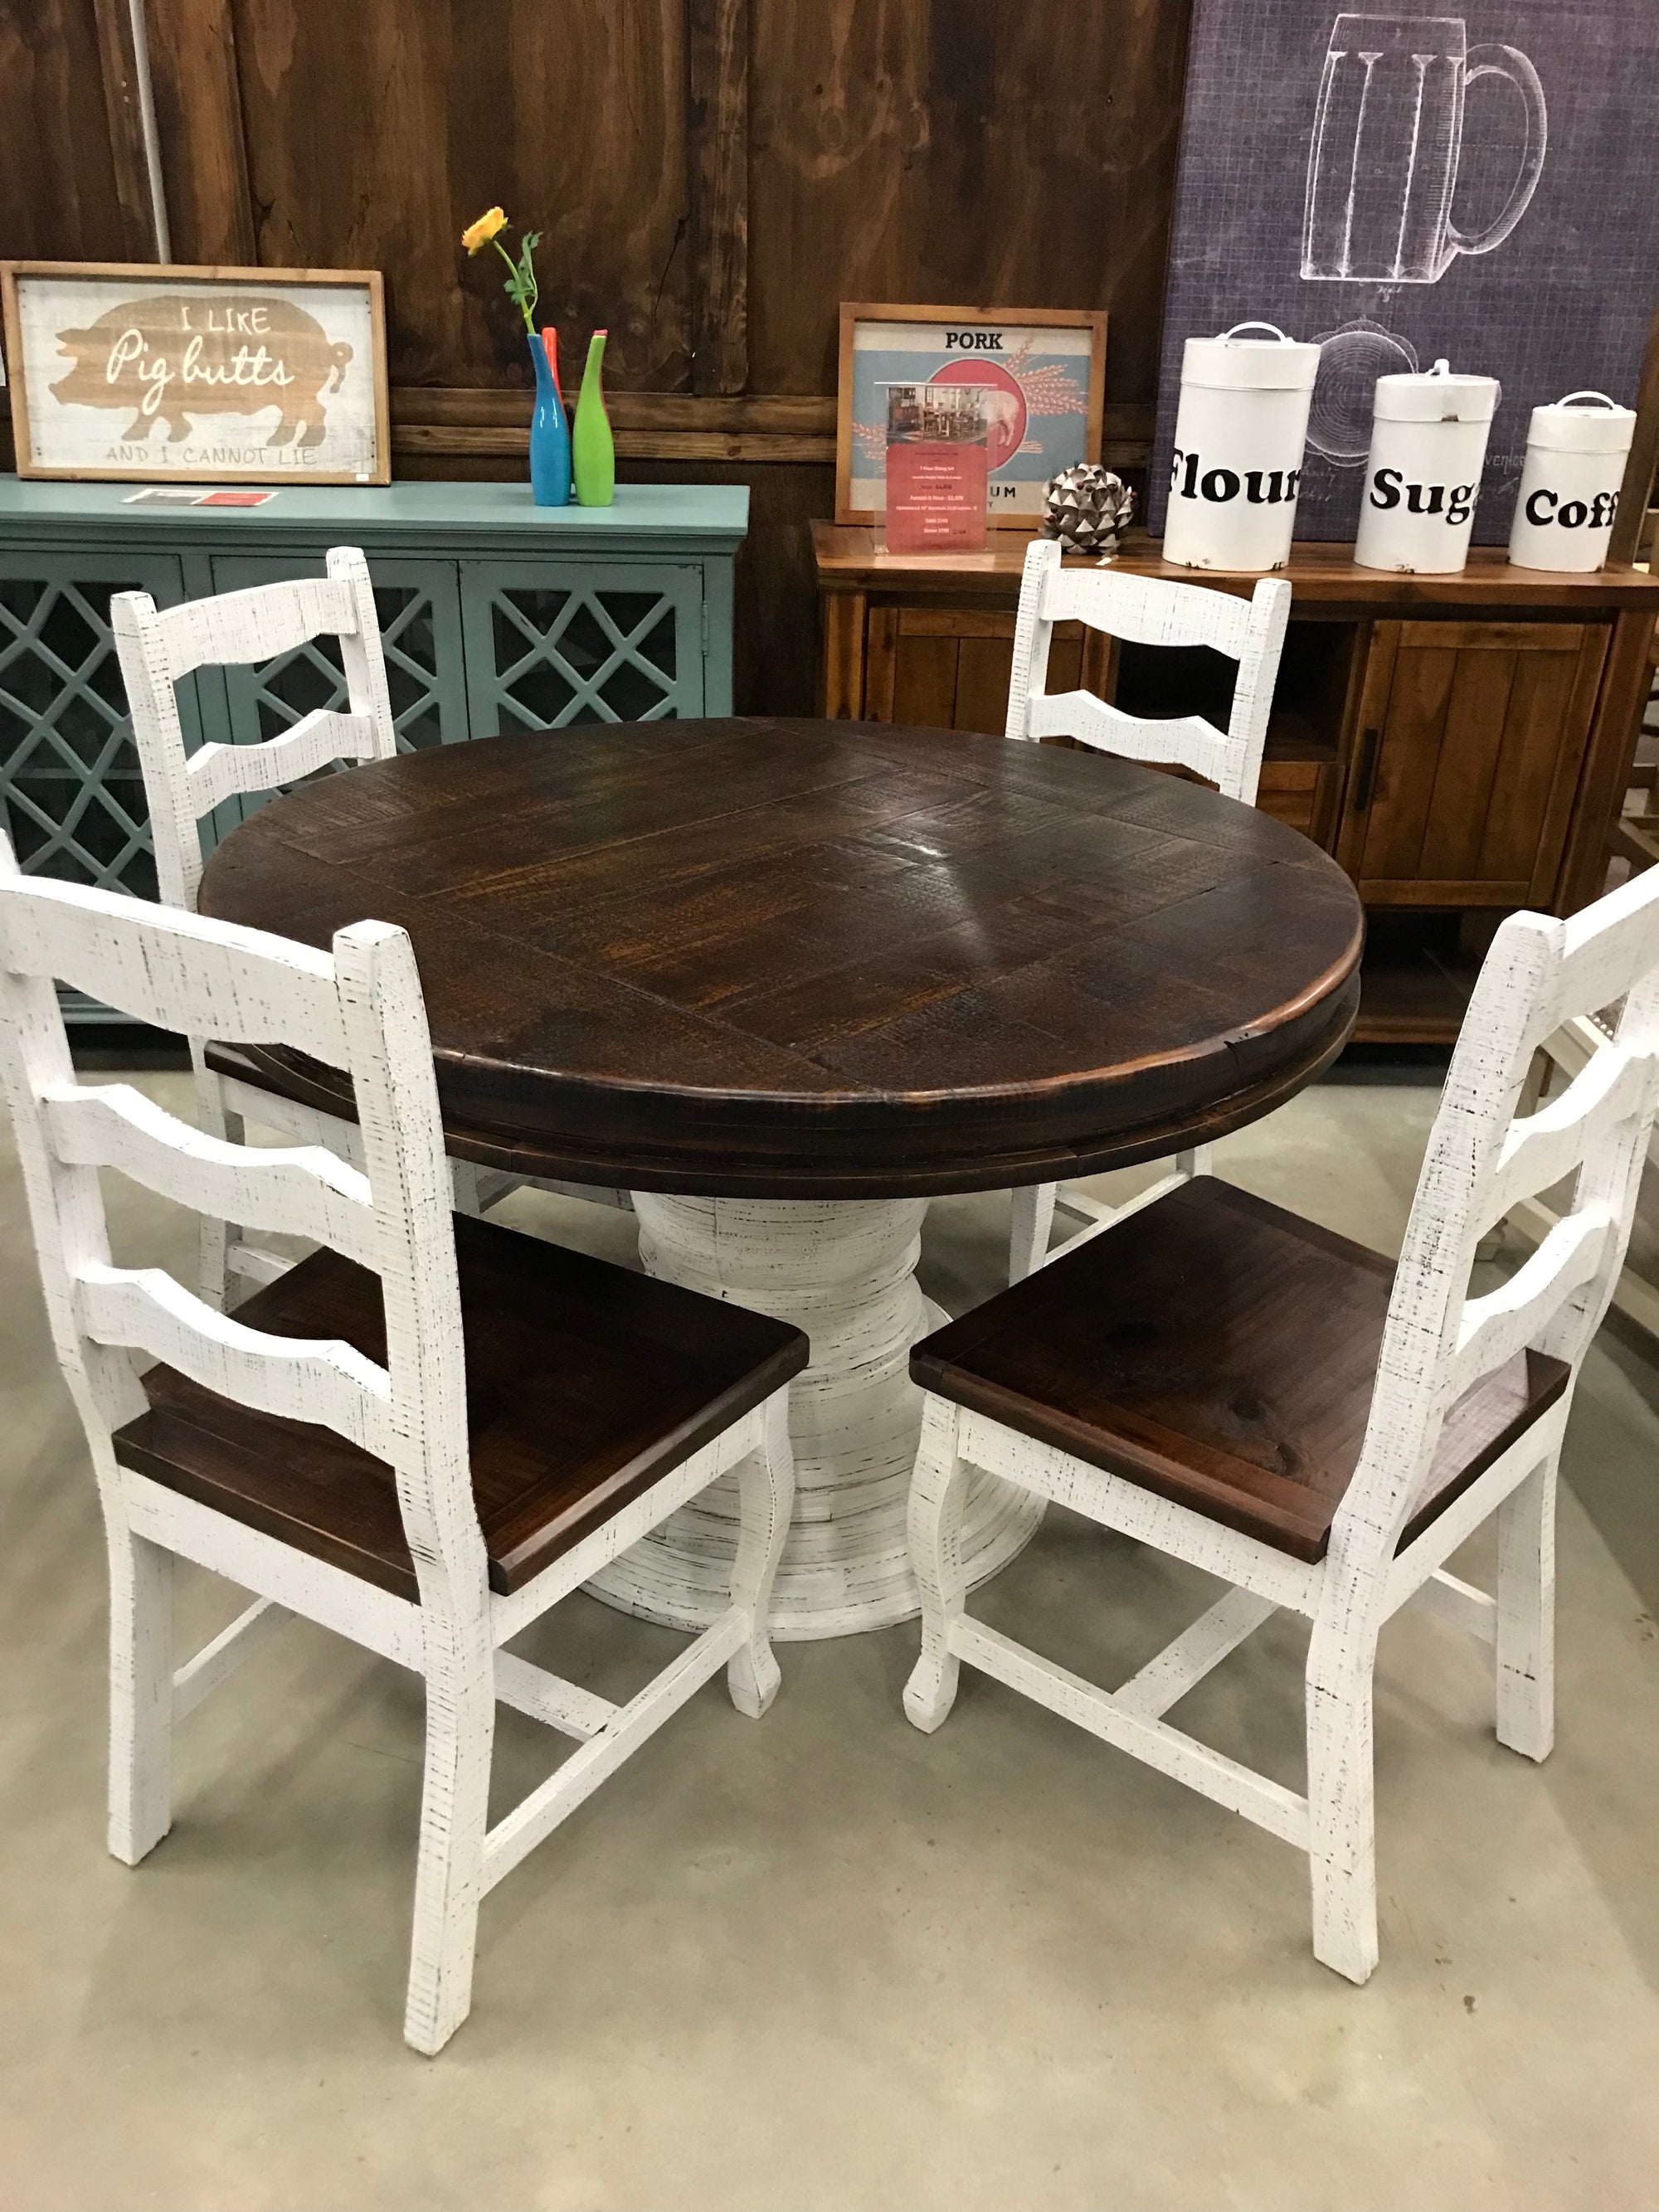 LN MES 137-58FI 47” Round Pedestal Table with 4 Florence Chairs